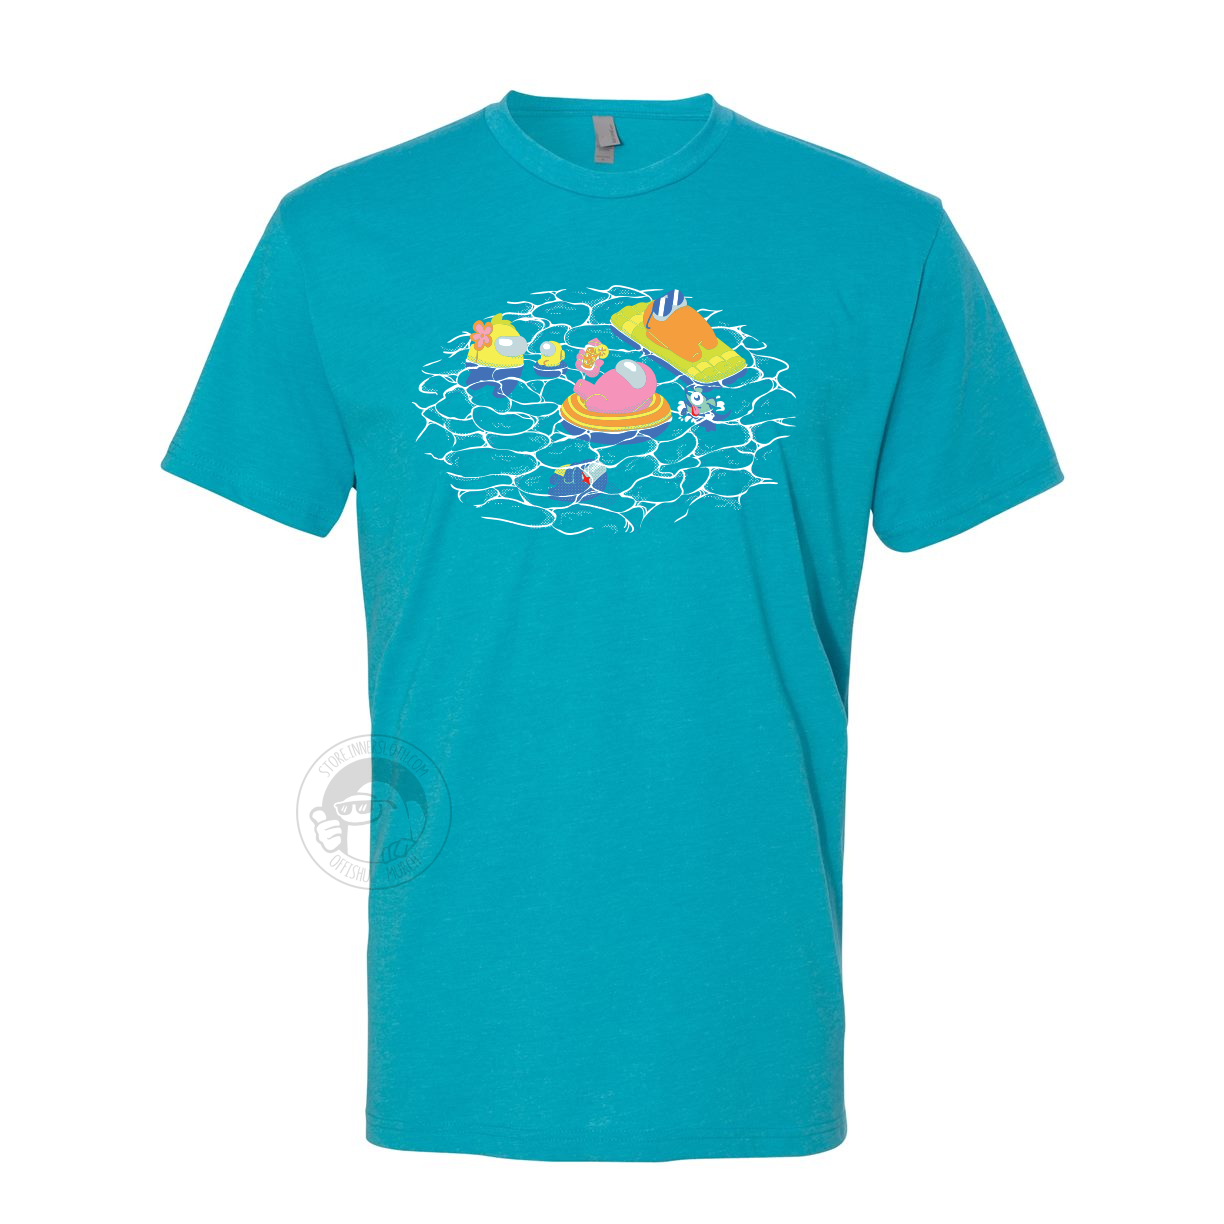 A product photo of the Among Us: Swimming Pool Tee. The t-shirt is turquoise blue and shows a pink crewmate lounging in an orange floatie on a teal, circular patch of water. A large yellow crewmate observes a yellow mini crewmate, in a tiny floatie. An orange crewmate, wearing sunglasses, sun bathes on a big lime pool floatie.You can also see a snorkeling space dog and an impostor at the bottom of the pool.